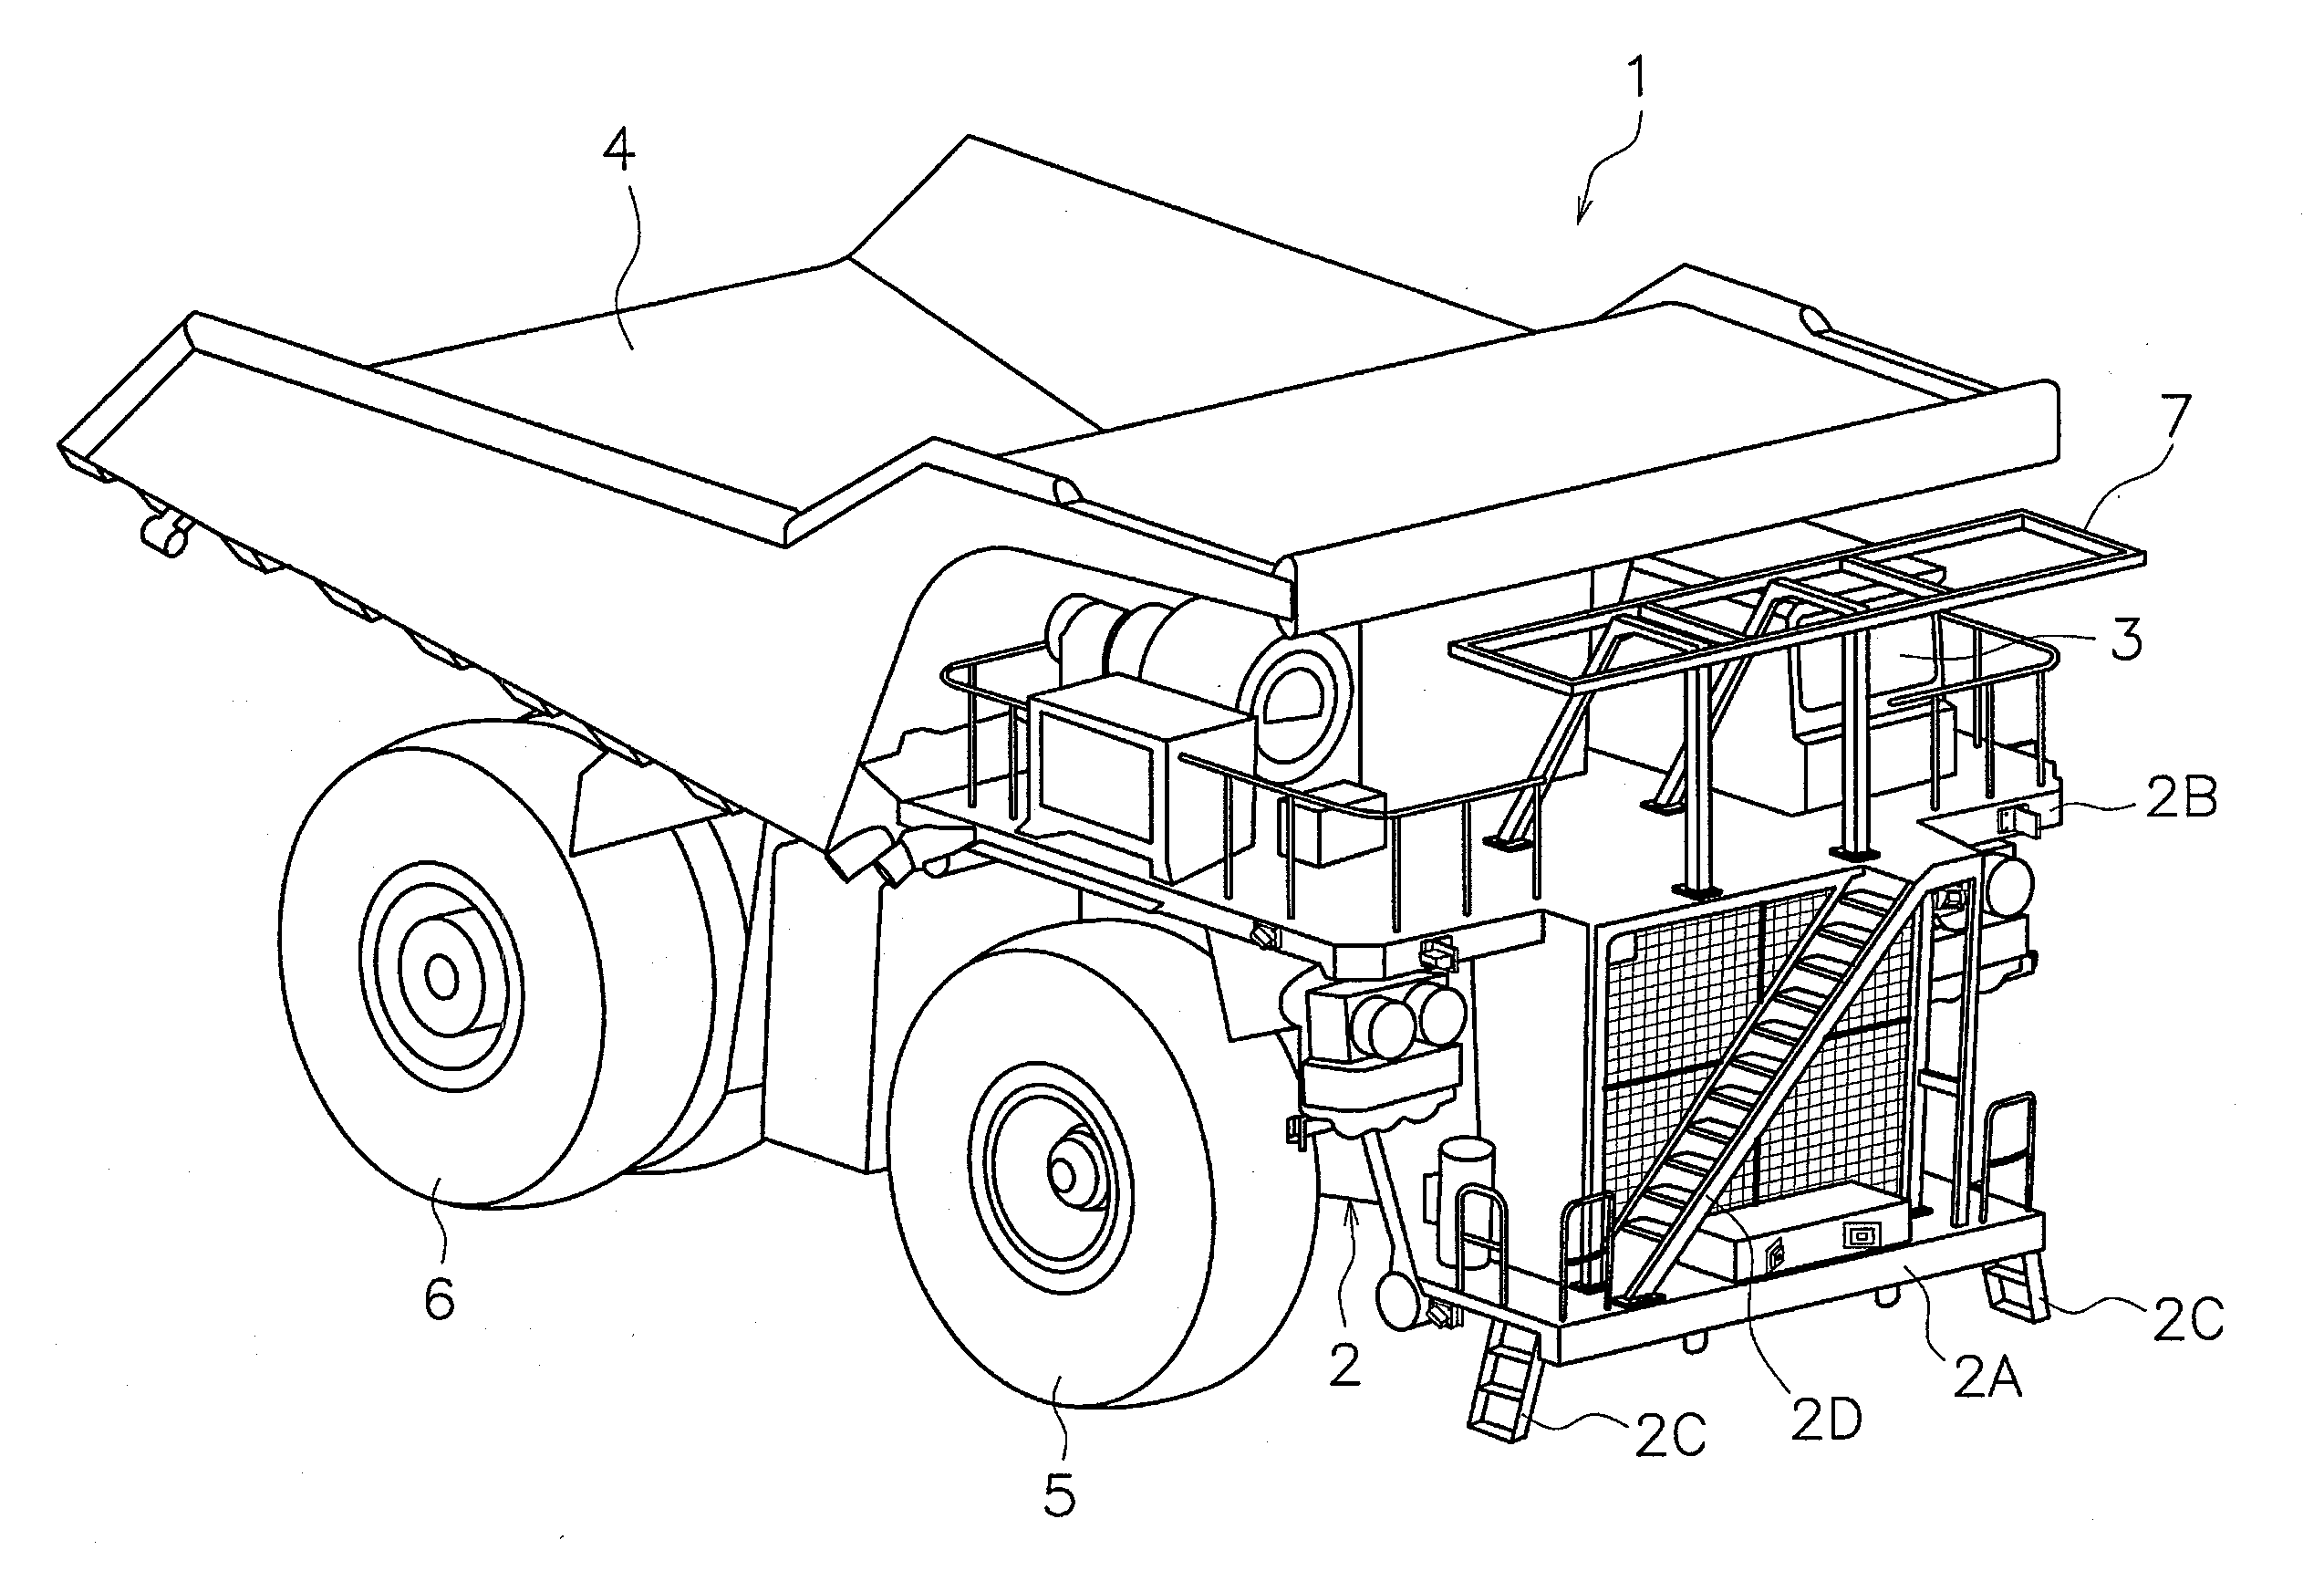 Perimeter monitoring device for work vehicle